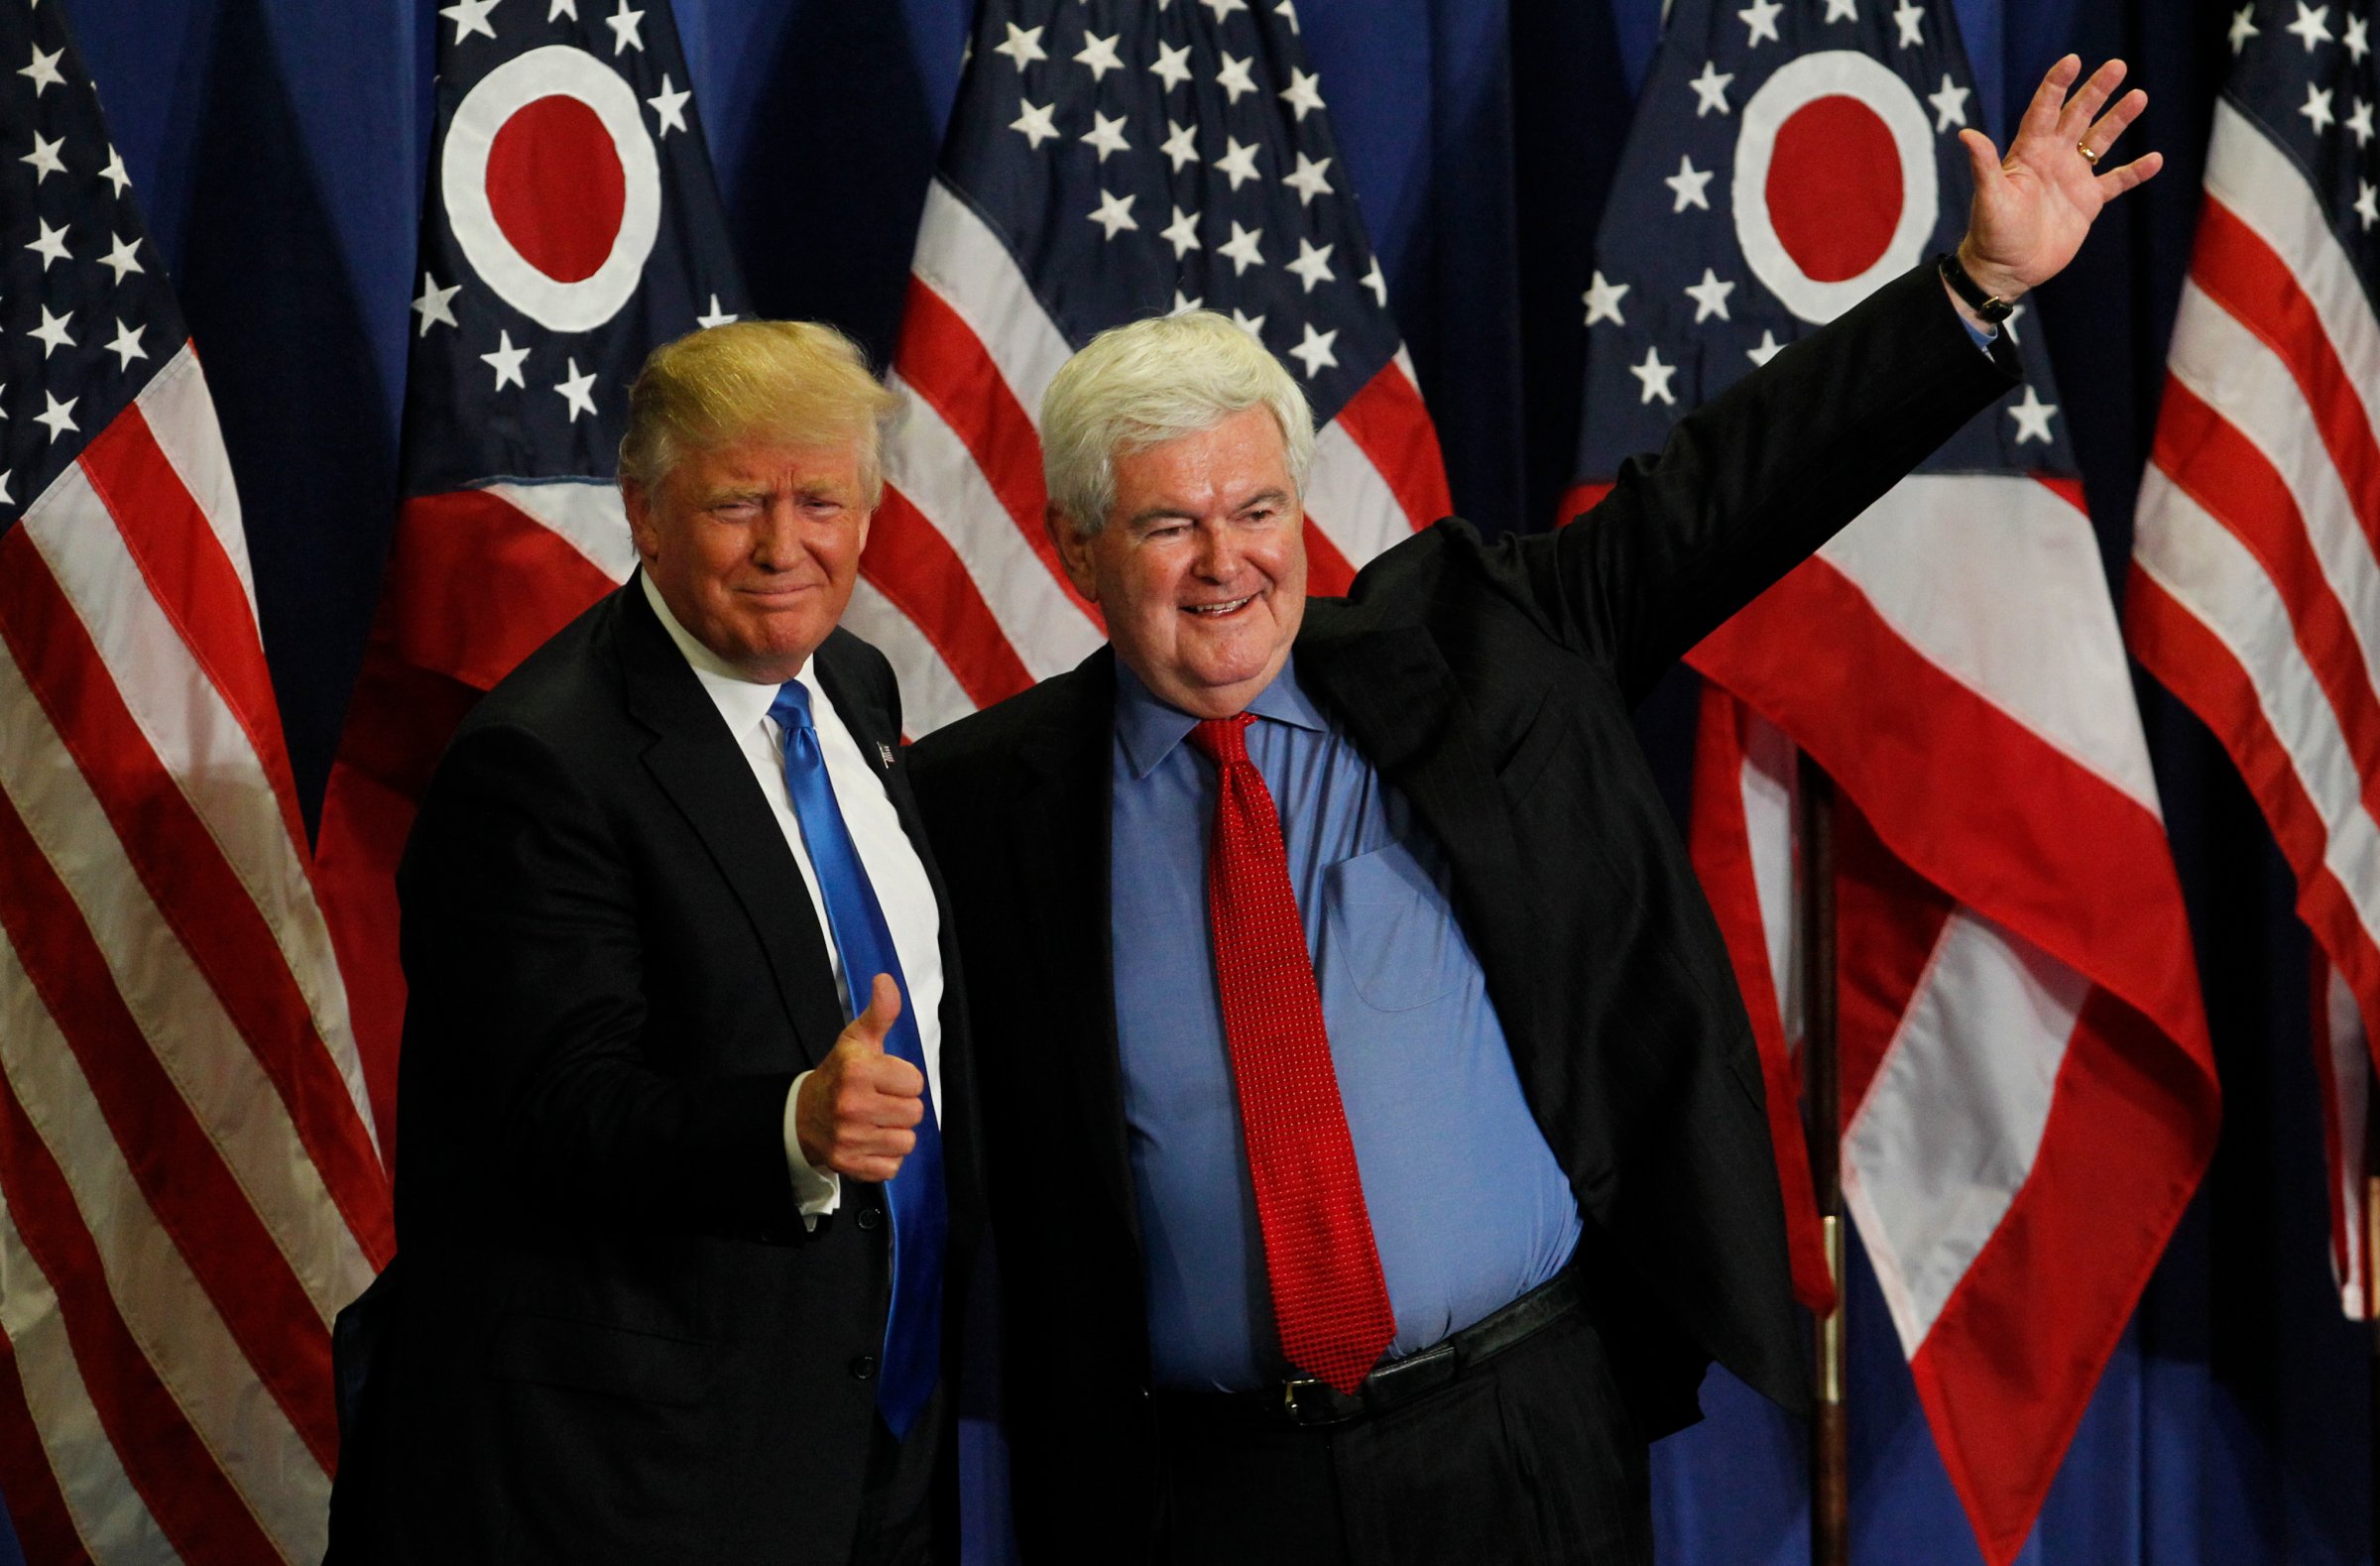 Former Speaker of the House Newt Gingrich (R) introduces Republican Presidential candidate Donald Trump during a rally at the Sharonville Convention Center in Cincinnati on July 6, 2016.